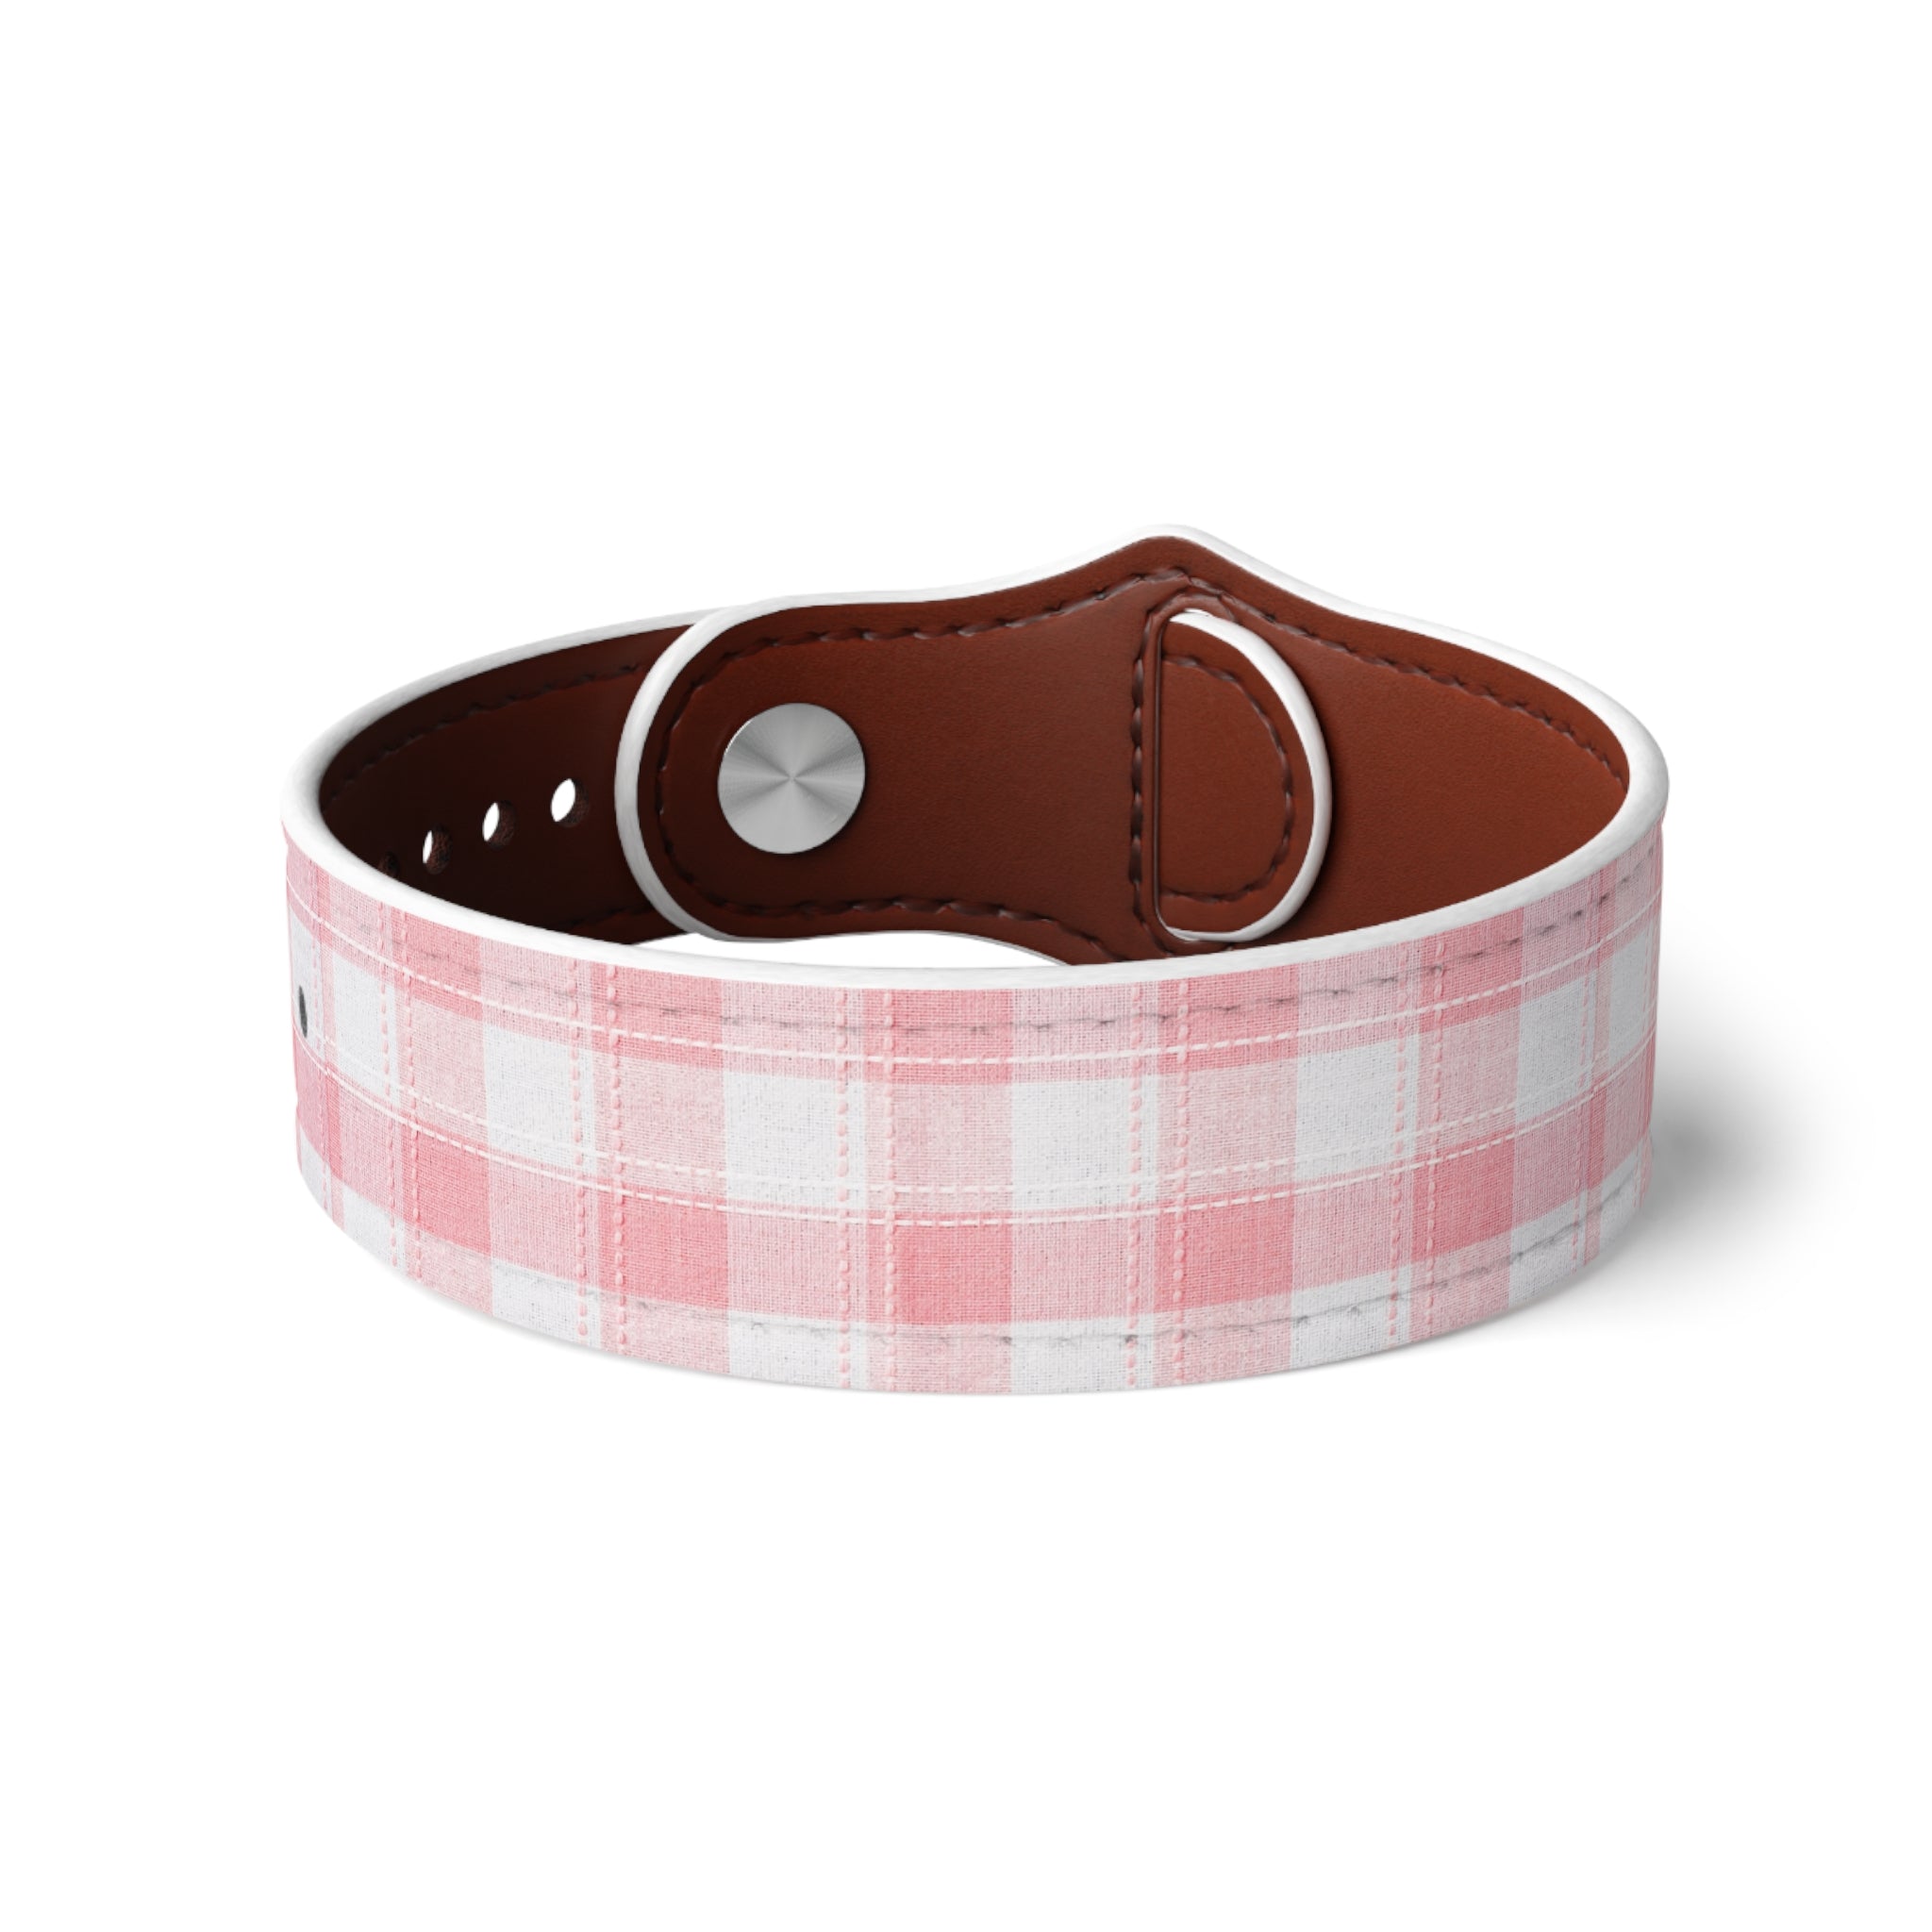 Casual Wear Accessories in Pink Plaid Faux Leather Wristband, Unisex Leather Bracelet, Faux Leather Cuff, Unisex Accessories